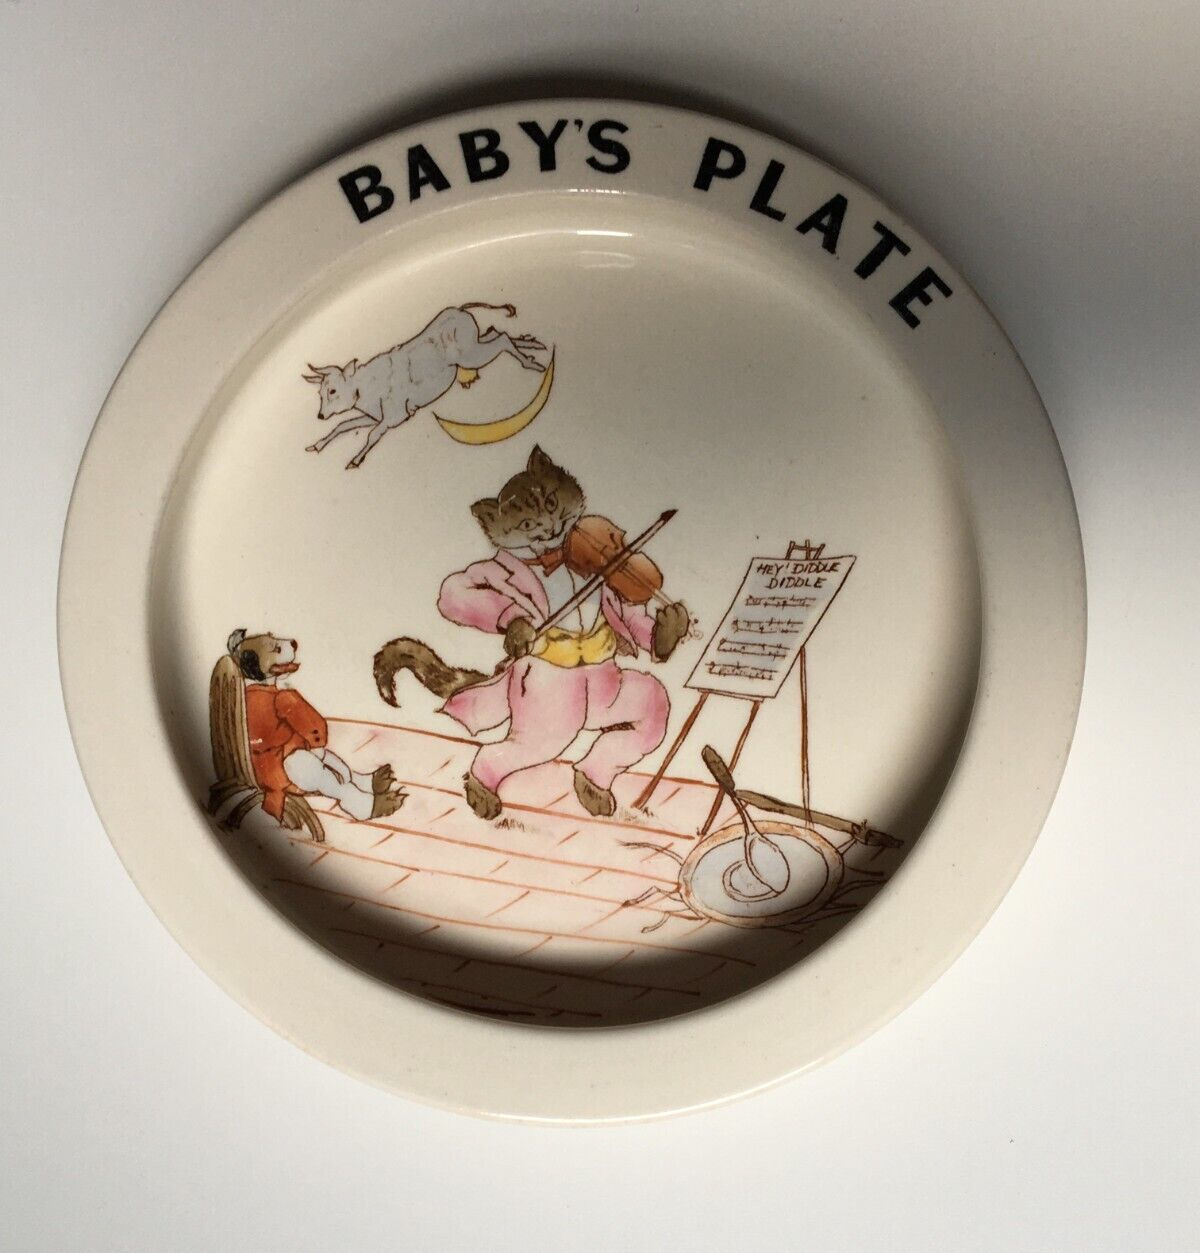 Antique Wiltshaw&Robinson Carlton Ware Baby's Plate Cat & the Fiddle C1900/1910